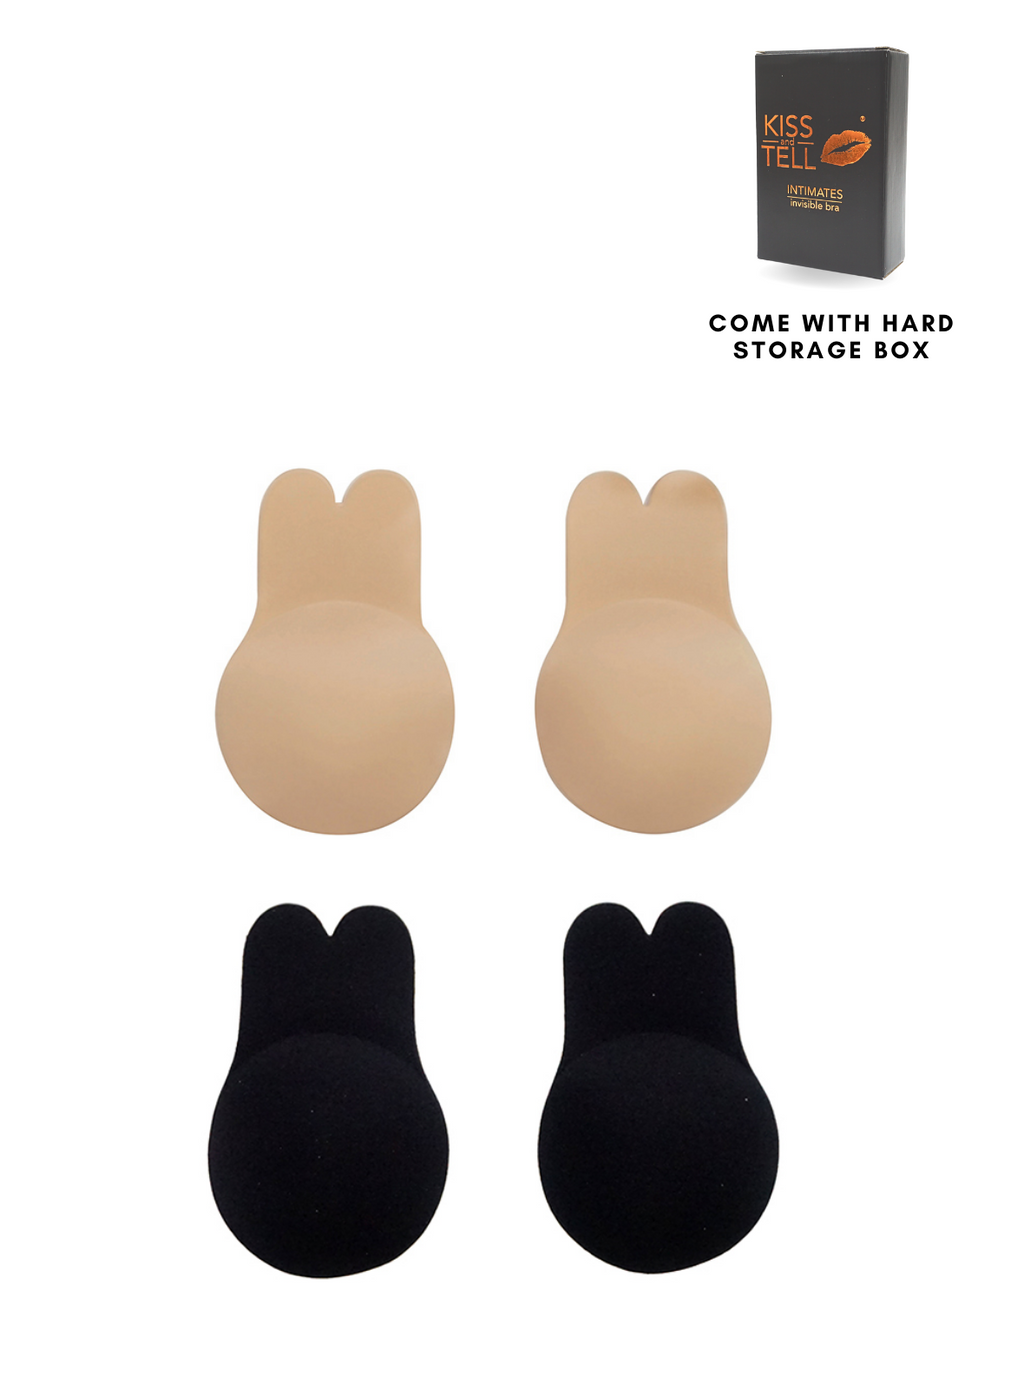 Kiss & Tell 2 Pack Lifting and Push Up Nubra Stick On Bra in Nude and Black  2024, Buy Kiss & Tell Online